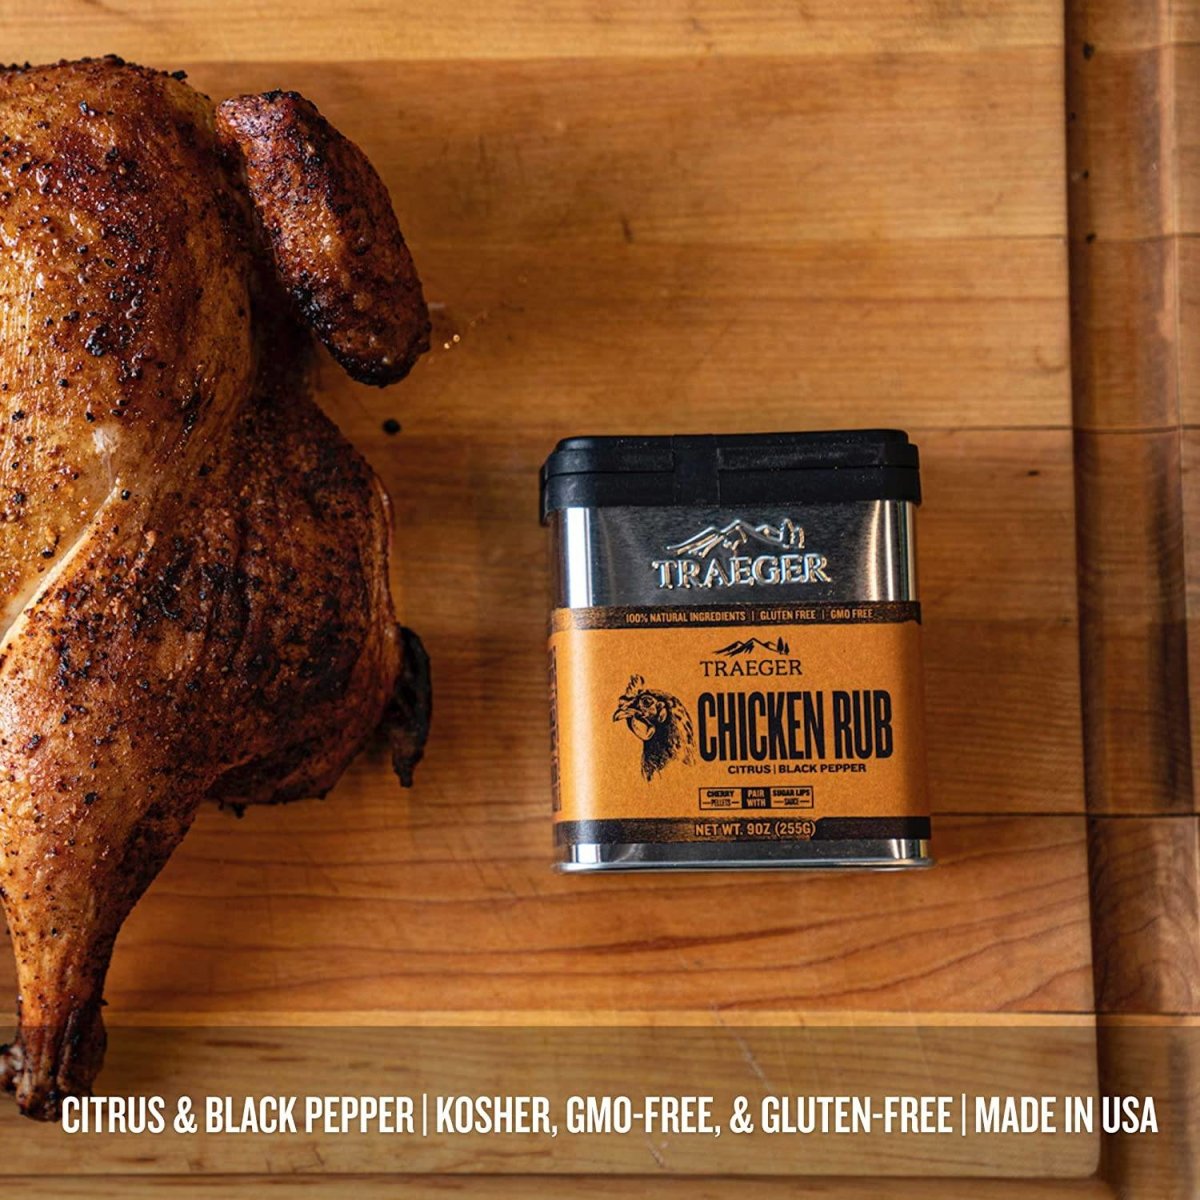 Traeger Chicken Rub with Citrus and Black Pepper - Texas Star Grill Shop SPC170